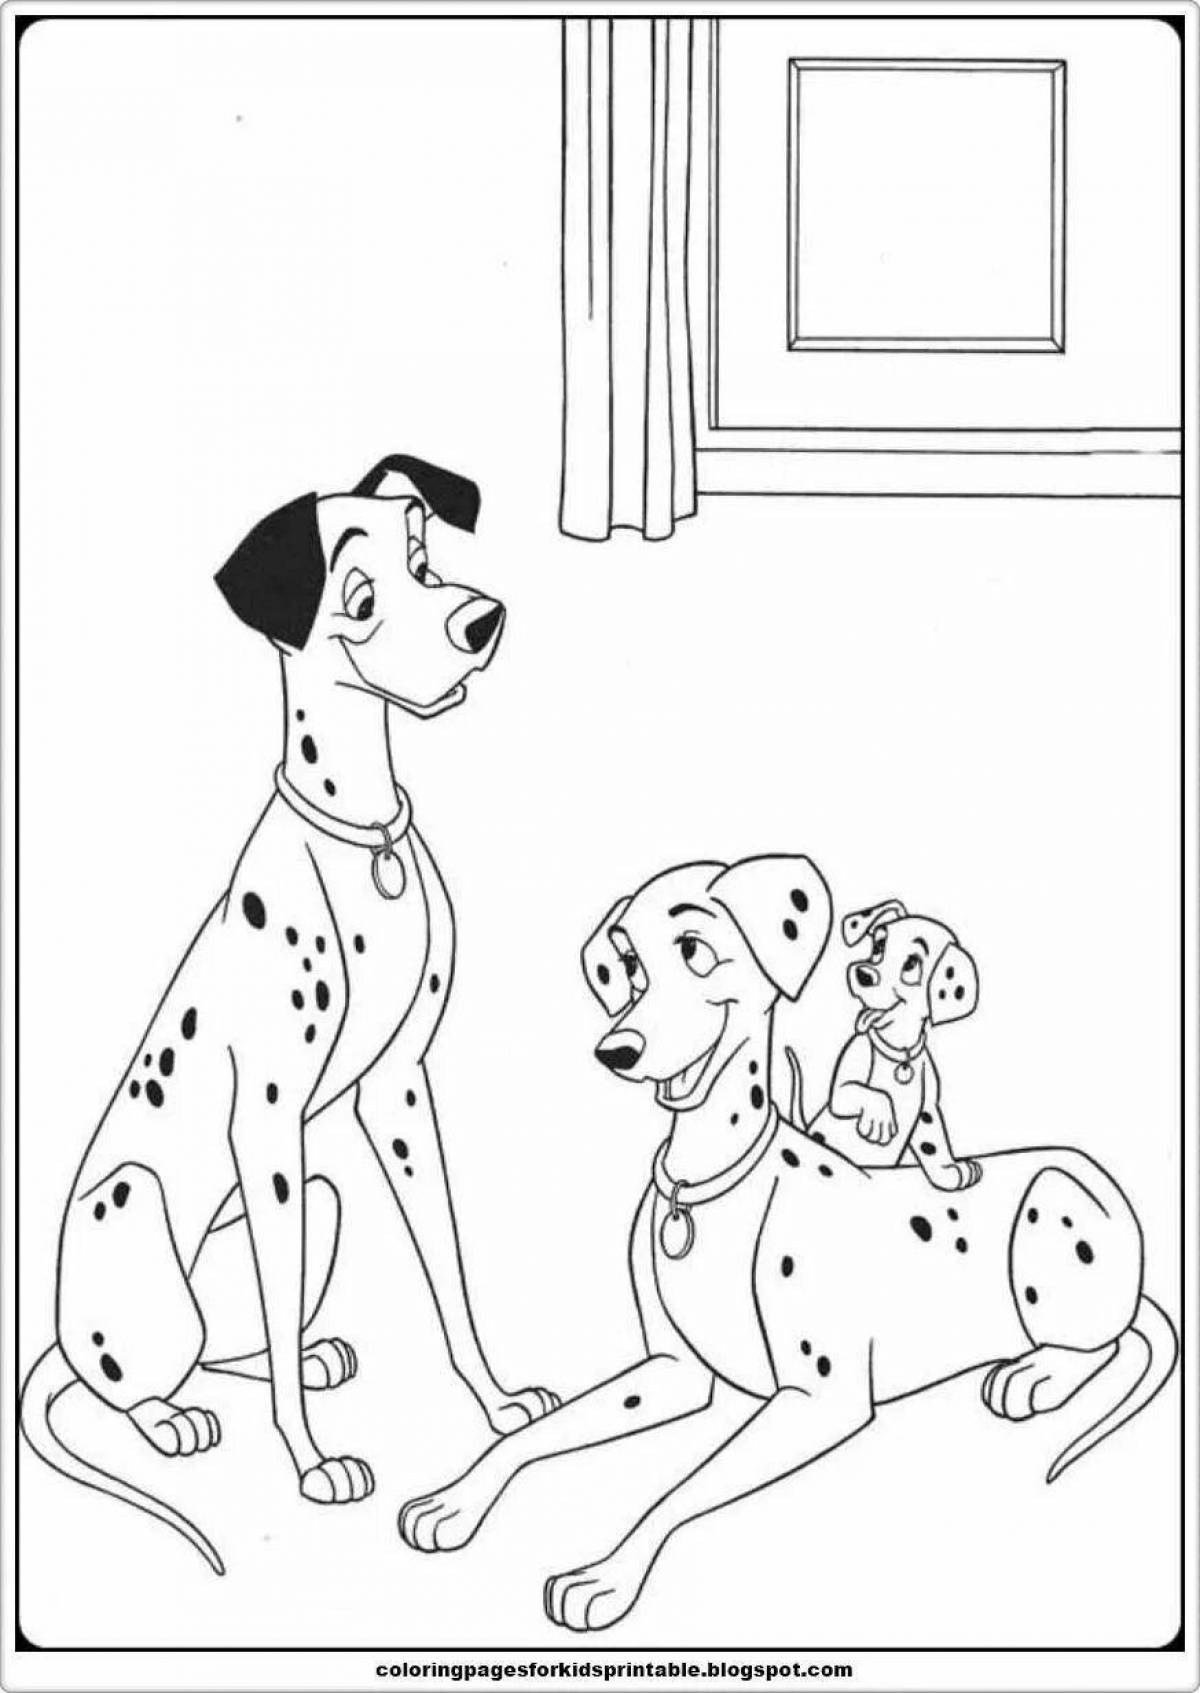 Coloring page exquisite dalmatian dog